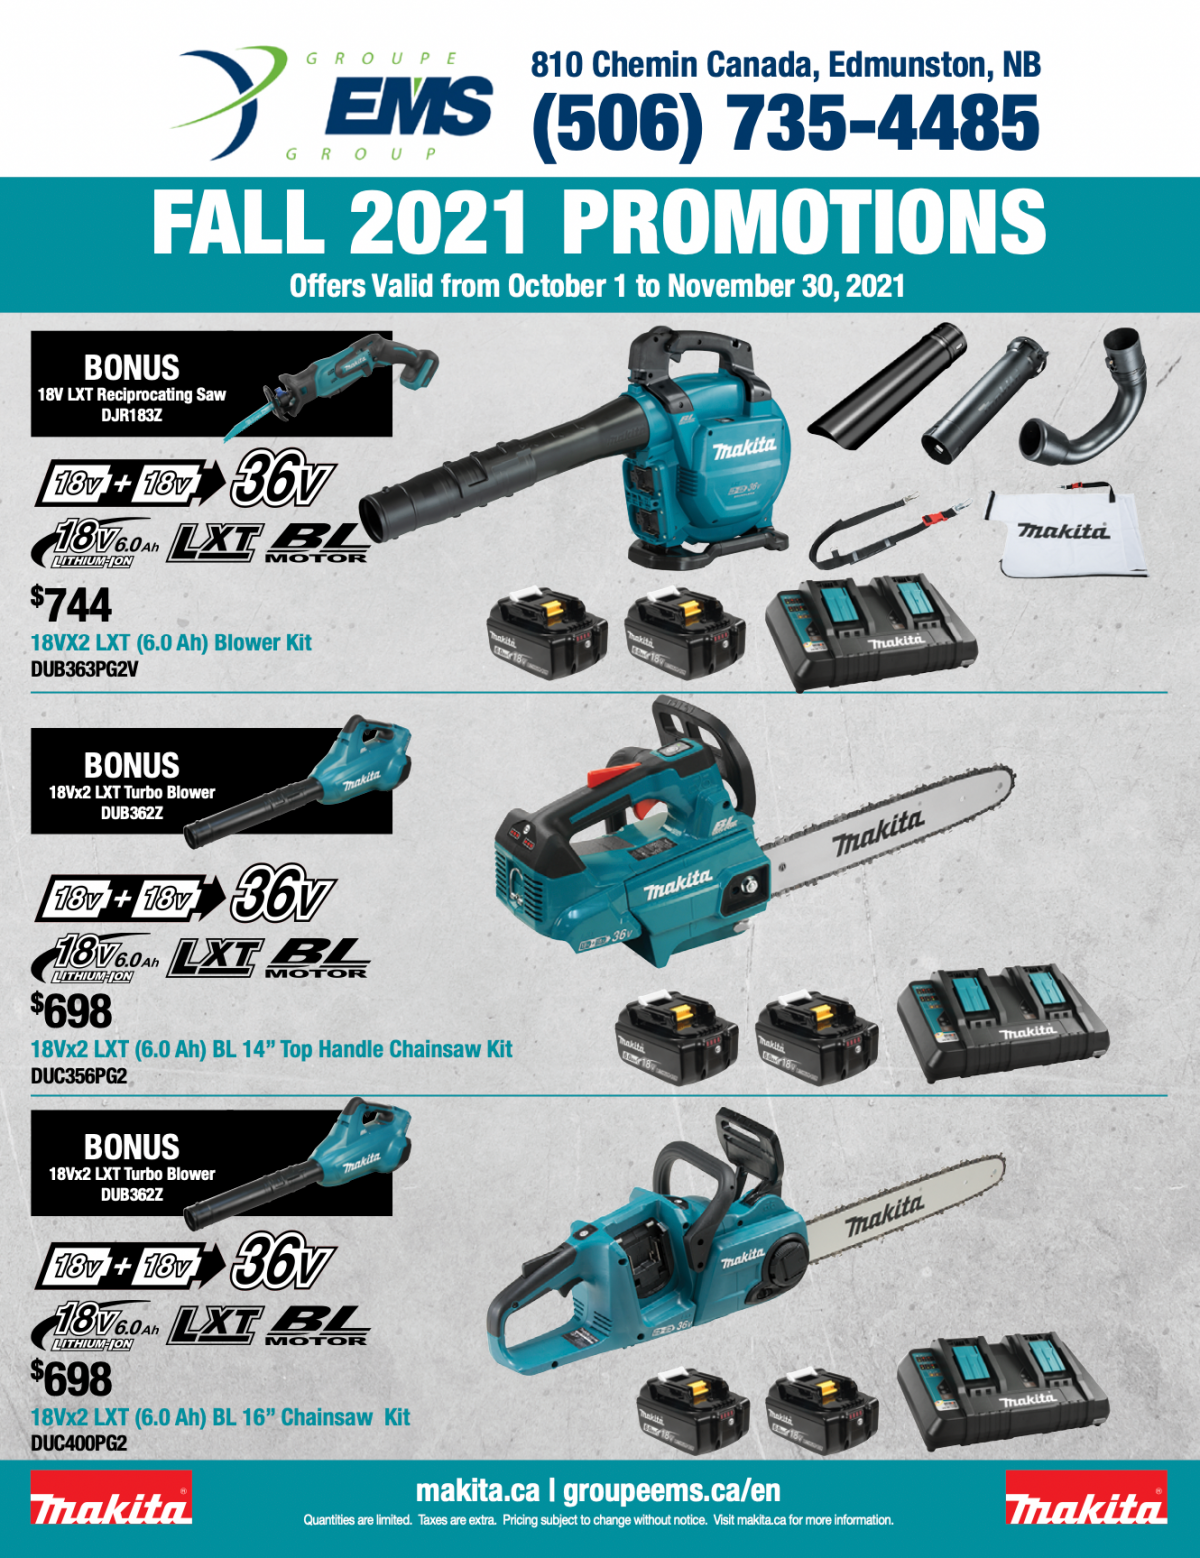 FALL 2021 PROMOTIONS